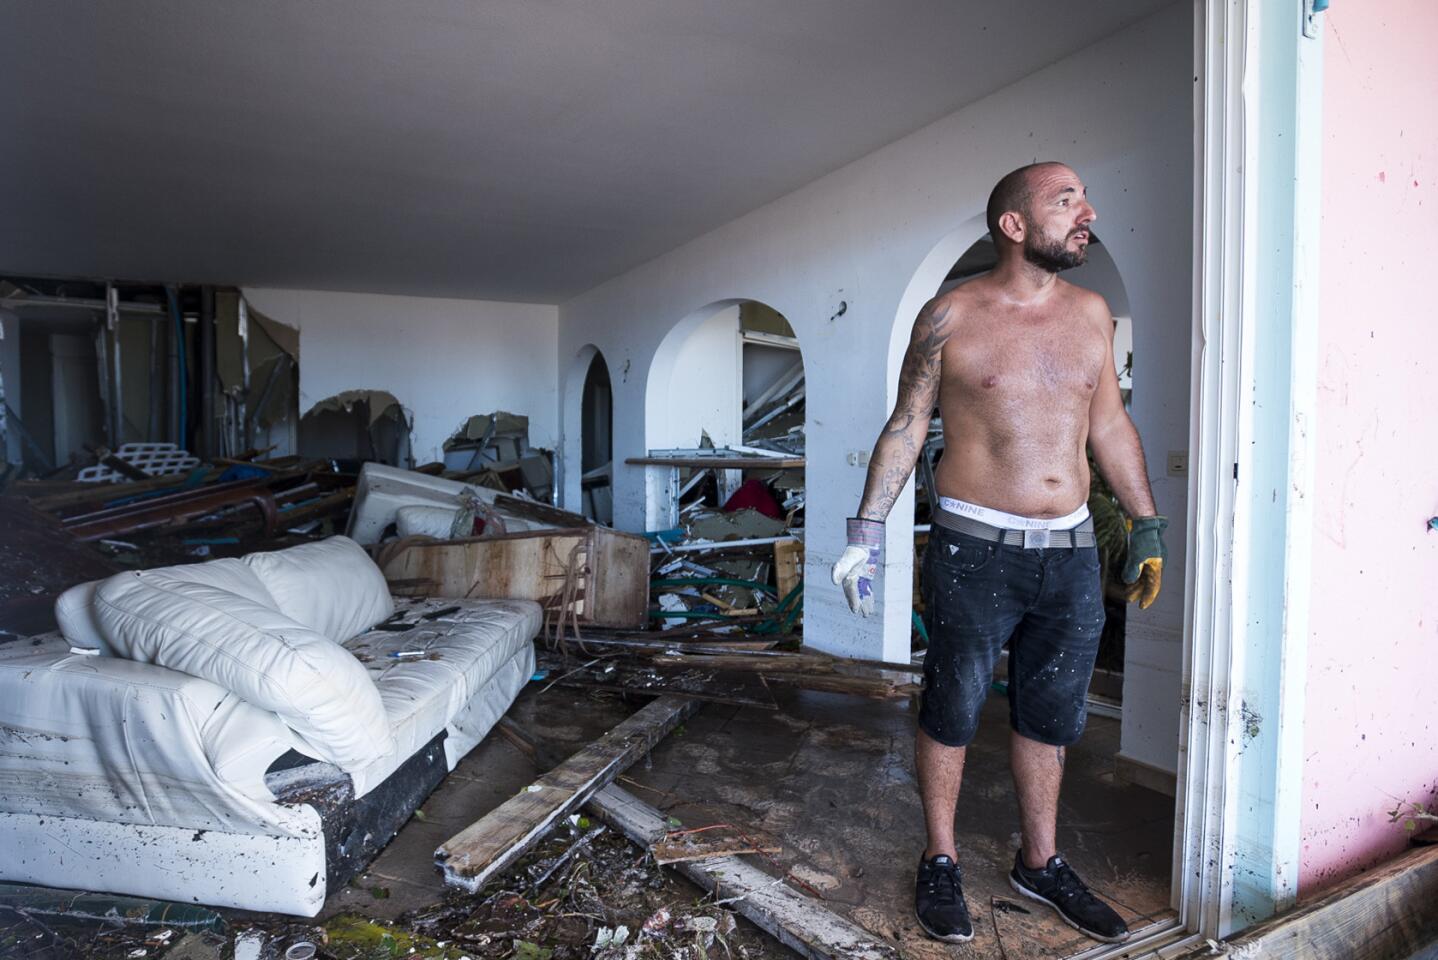 A man reacts as he stands in his destroyed home on September 7, 2017 in Orient Bay on the French Carribean island of Saint-Martin, after the passage of Hurricane Irma. France, the Netherlands and Britain on September 7 rushed to provide water, emergency rations and rescue teams to territories in the Caribbean hit by Hurricane Irma, with aid efforts complicated by damage to local airports and harbours. The worst-affected island so far is Saint Martin, which is divided between the Netherlands and France, where French Prime Minister Edouard Philippe confirmed four people were killed and 50 more injured.